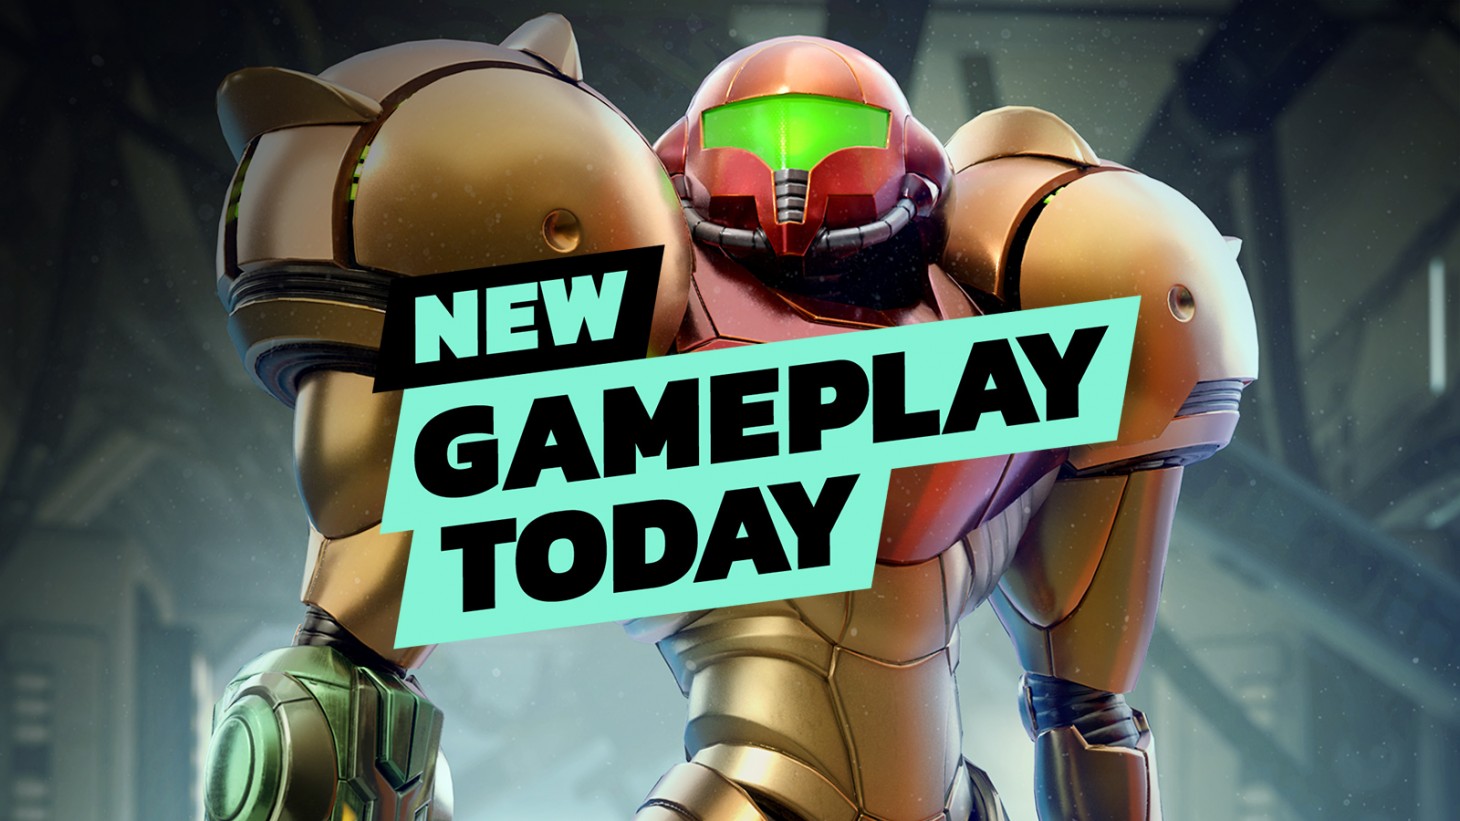 Metroid Prime Remastered  New Gameplay Today - Game Informer